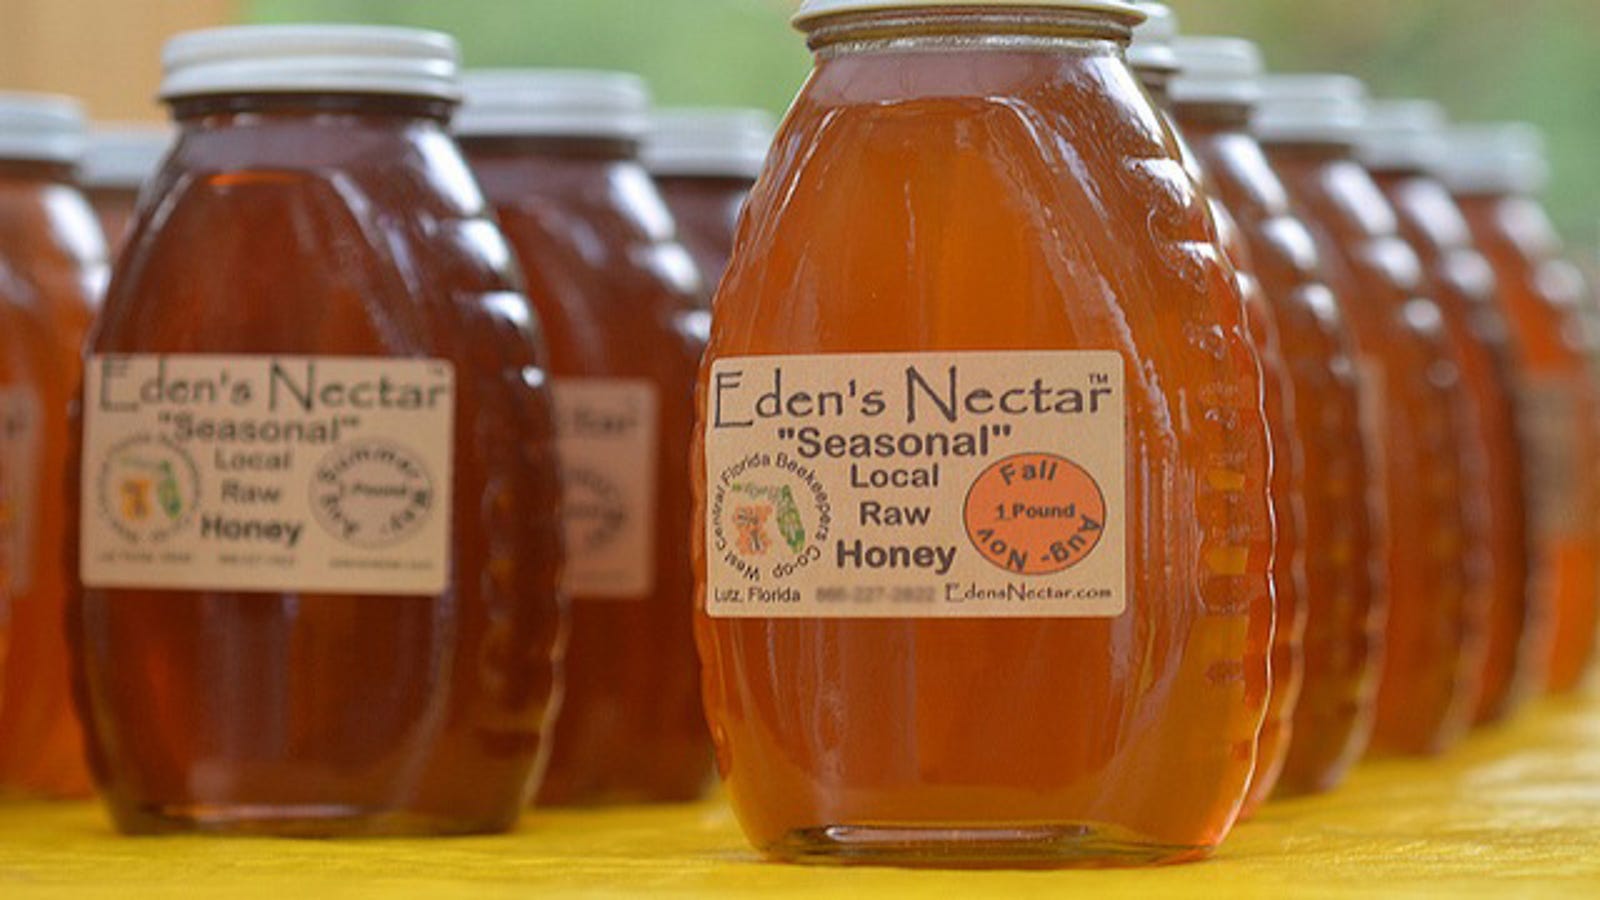 Buy Local Honey to Make Sure You're Really Getting Honey, and Support